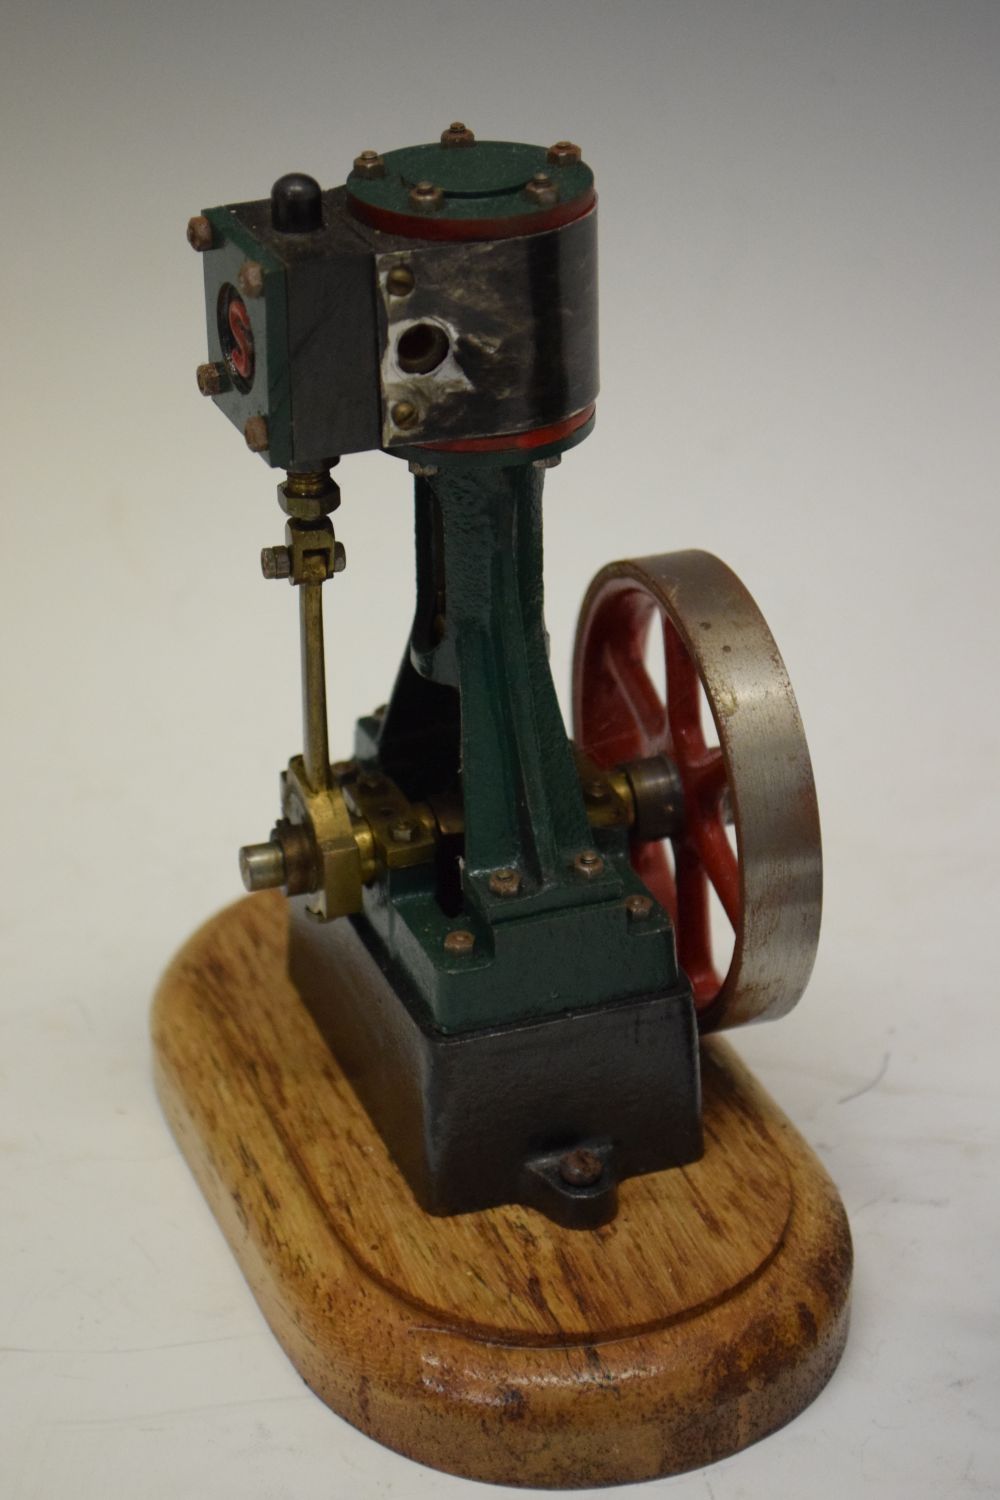 Stuart Turner model No.10 stationary steam engine, with 3-inch single fly wheel, 15cm high, on - Image 7 of 11